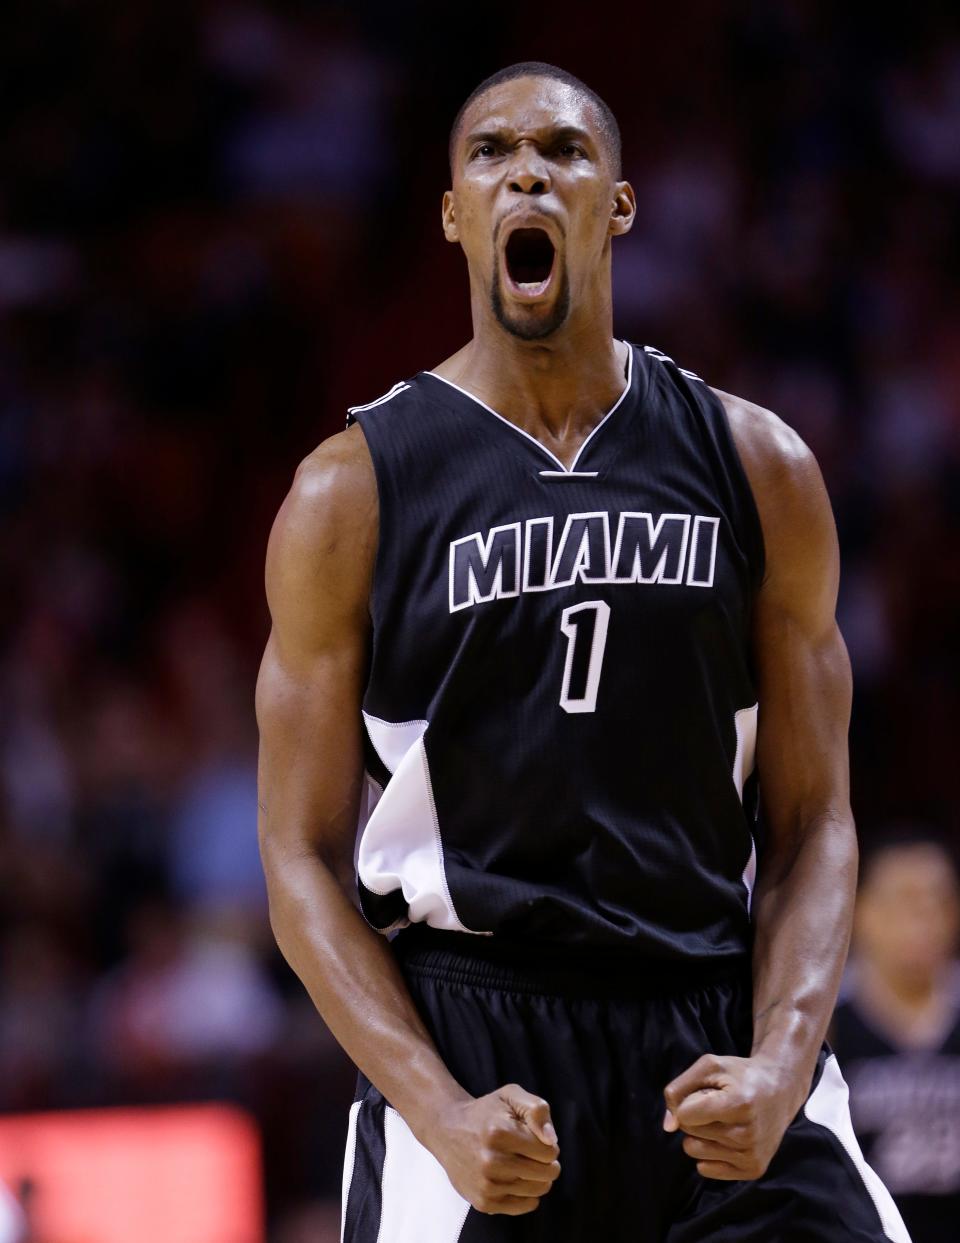 Miami Heat center Chris Bosh celebrates after scoring during the second half of an NBA basketball game against the New York Knicks, Monday, Feb. 9, 2015, in Miami. Bosh scored 32 points in the game as the Heat defeated the Knicks 109-95.